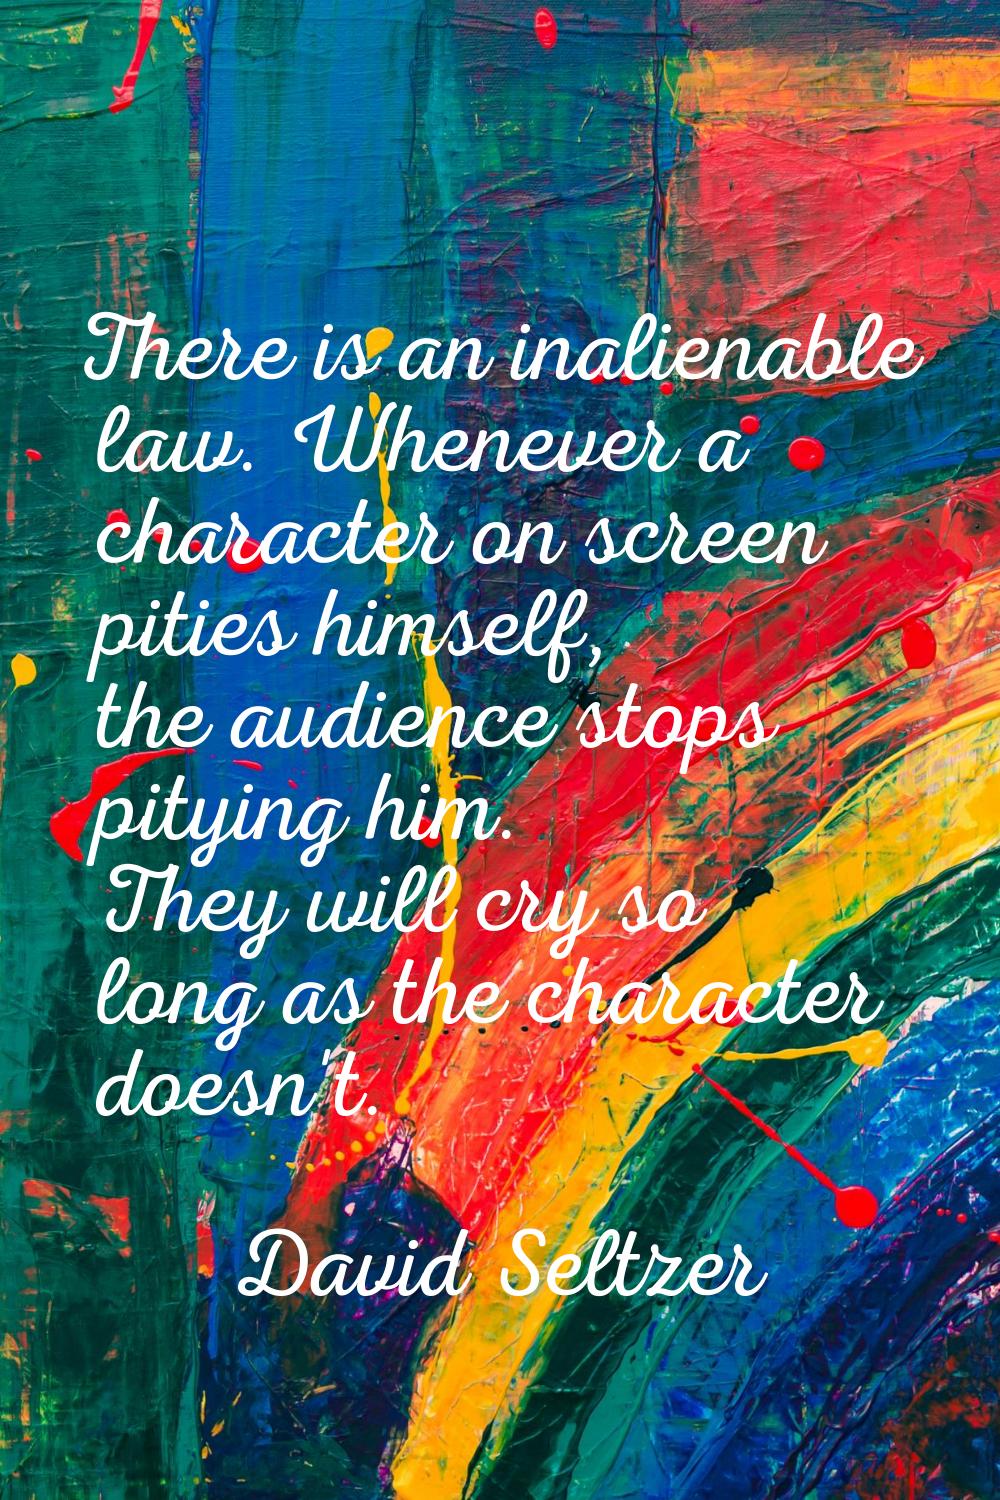 There is an inalienable law. Whenever a character on screen pities himself, the audience stops pity